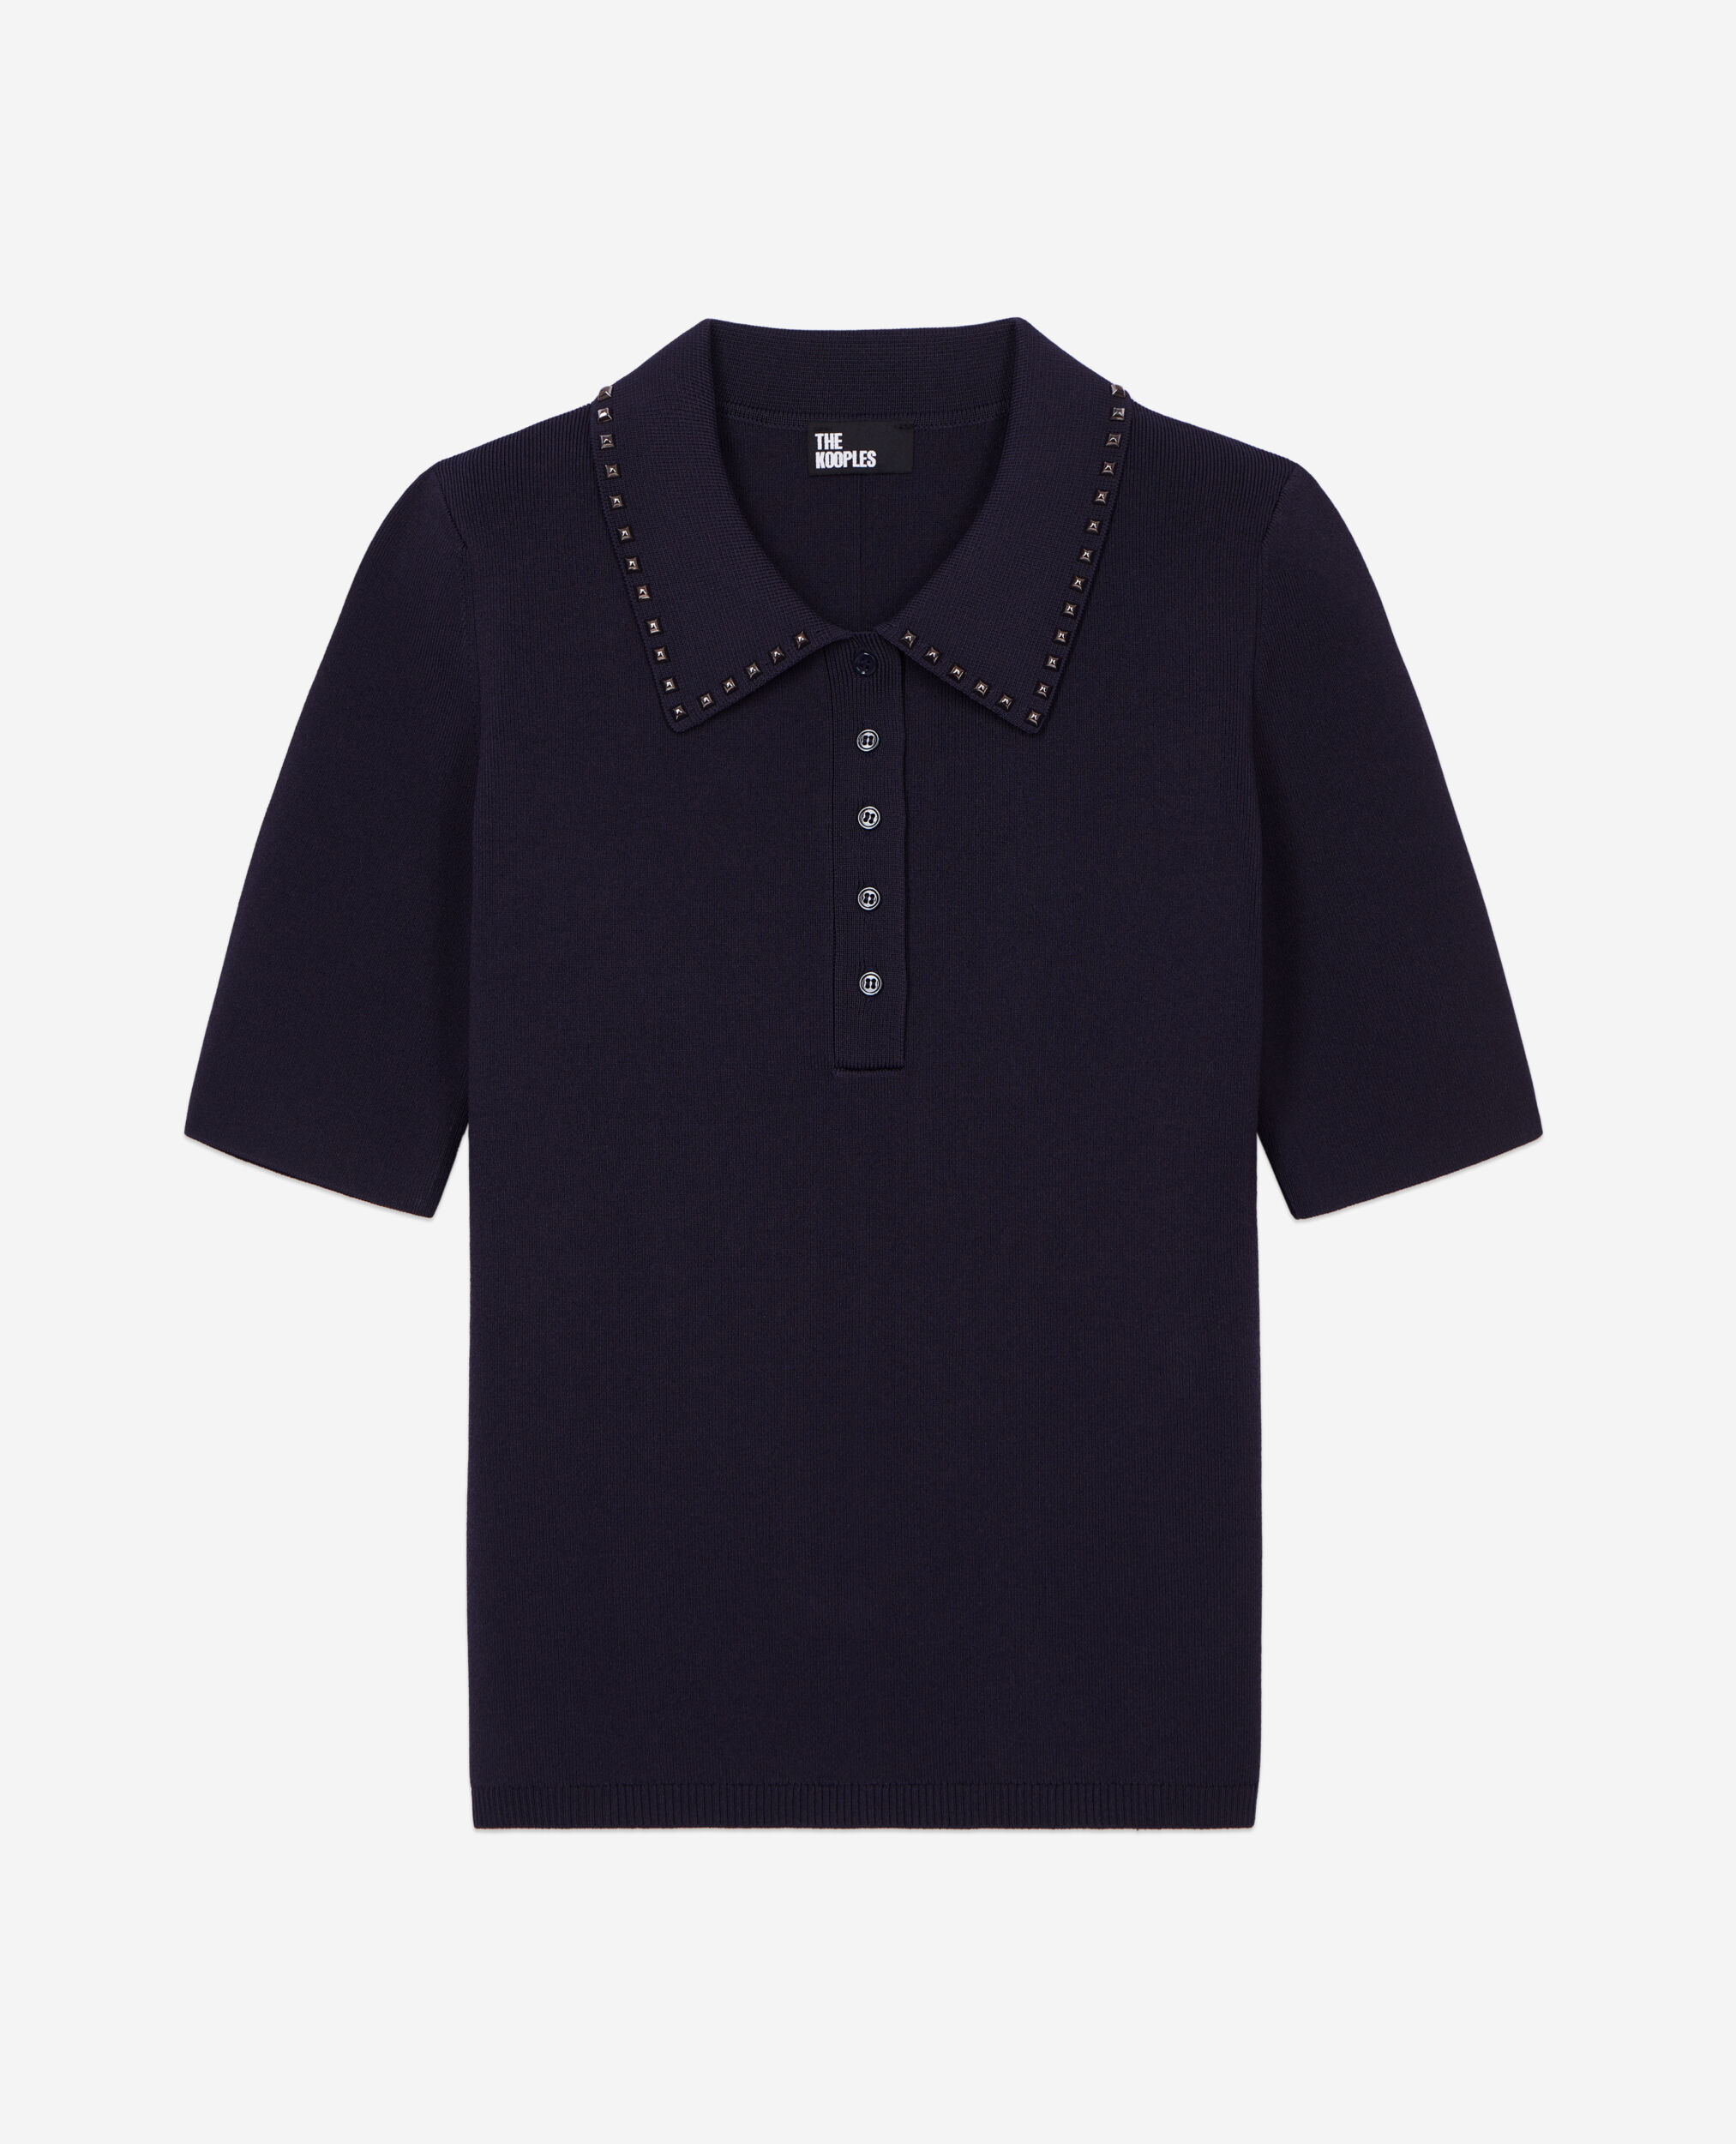 Navy blue knitted polo t-shirt, NAVY, hi-res image number null